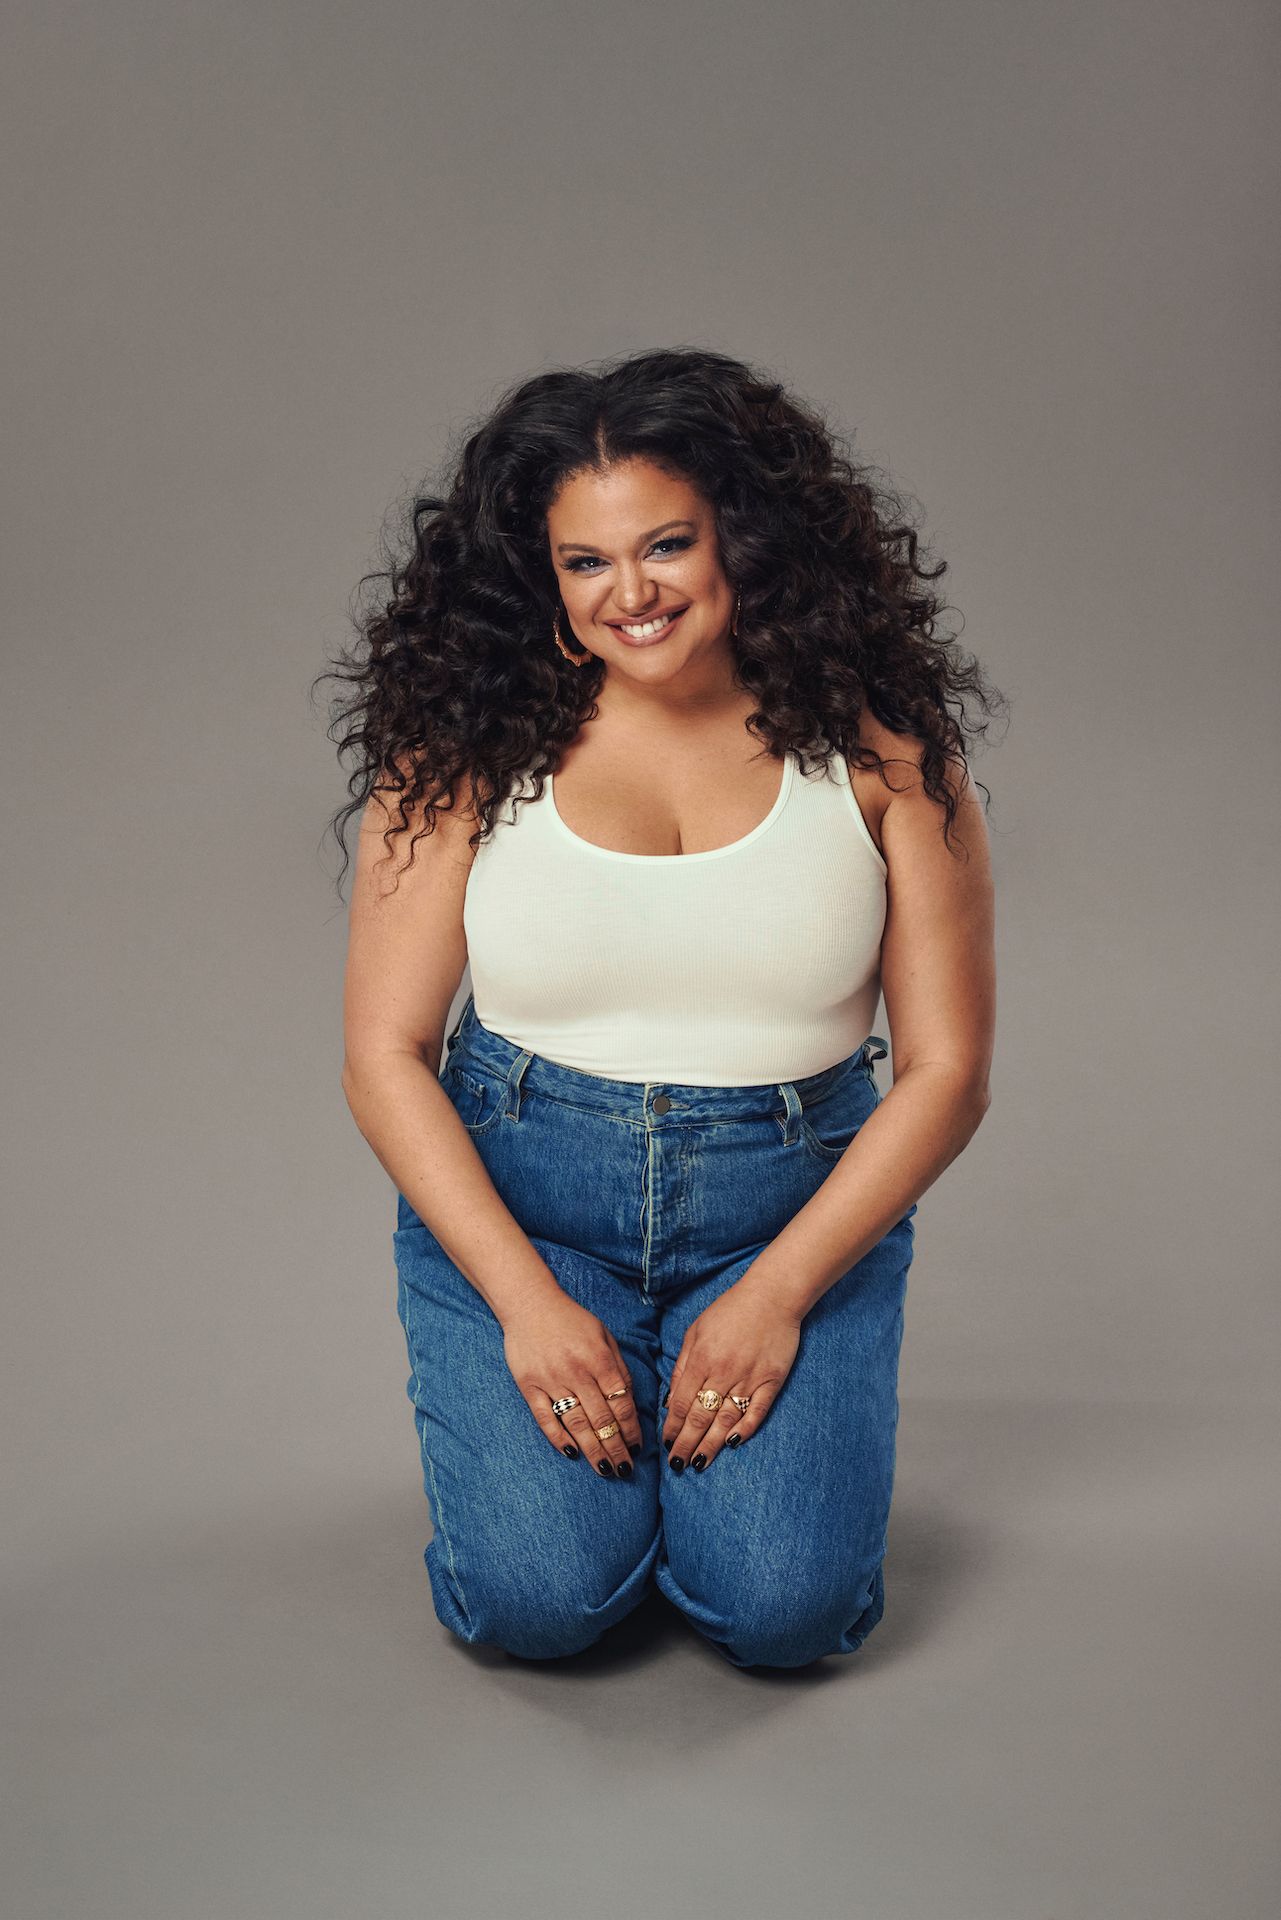 Survival of the Thickest, Book by Michelle Buteau